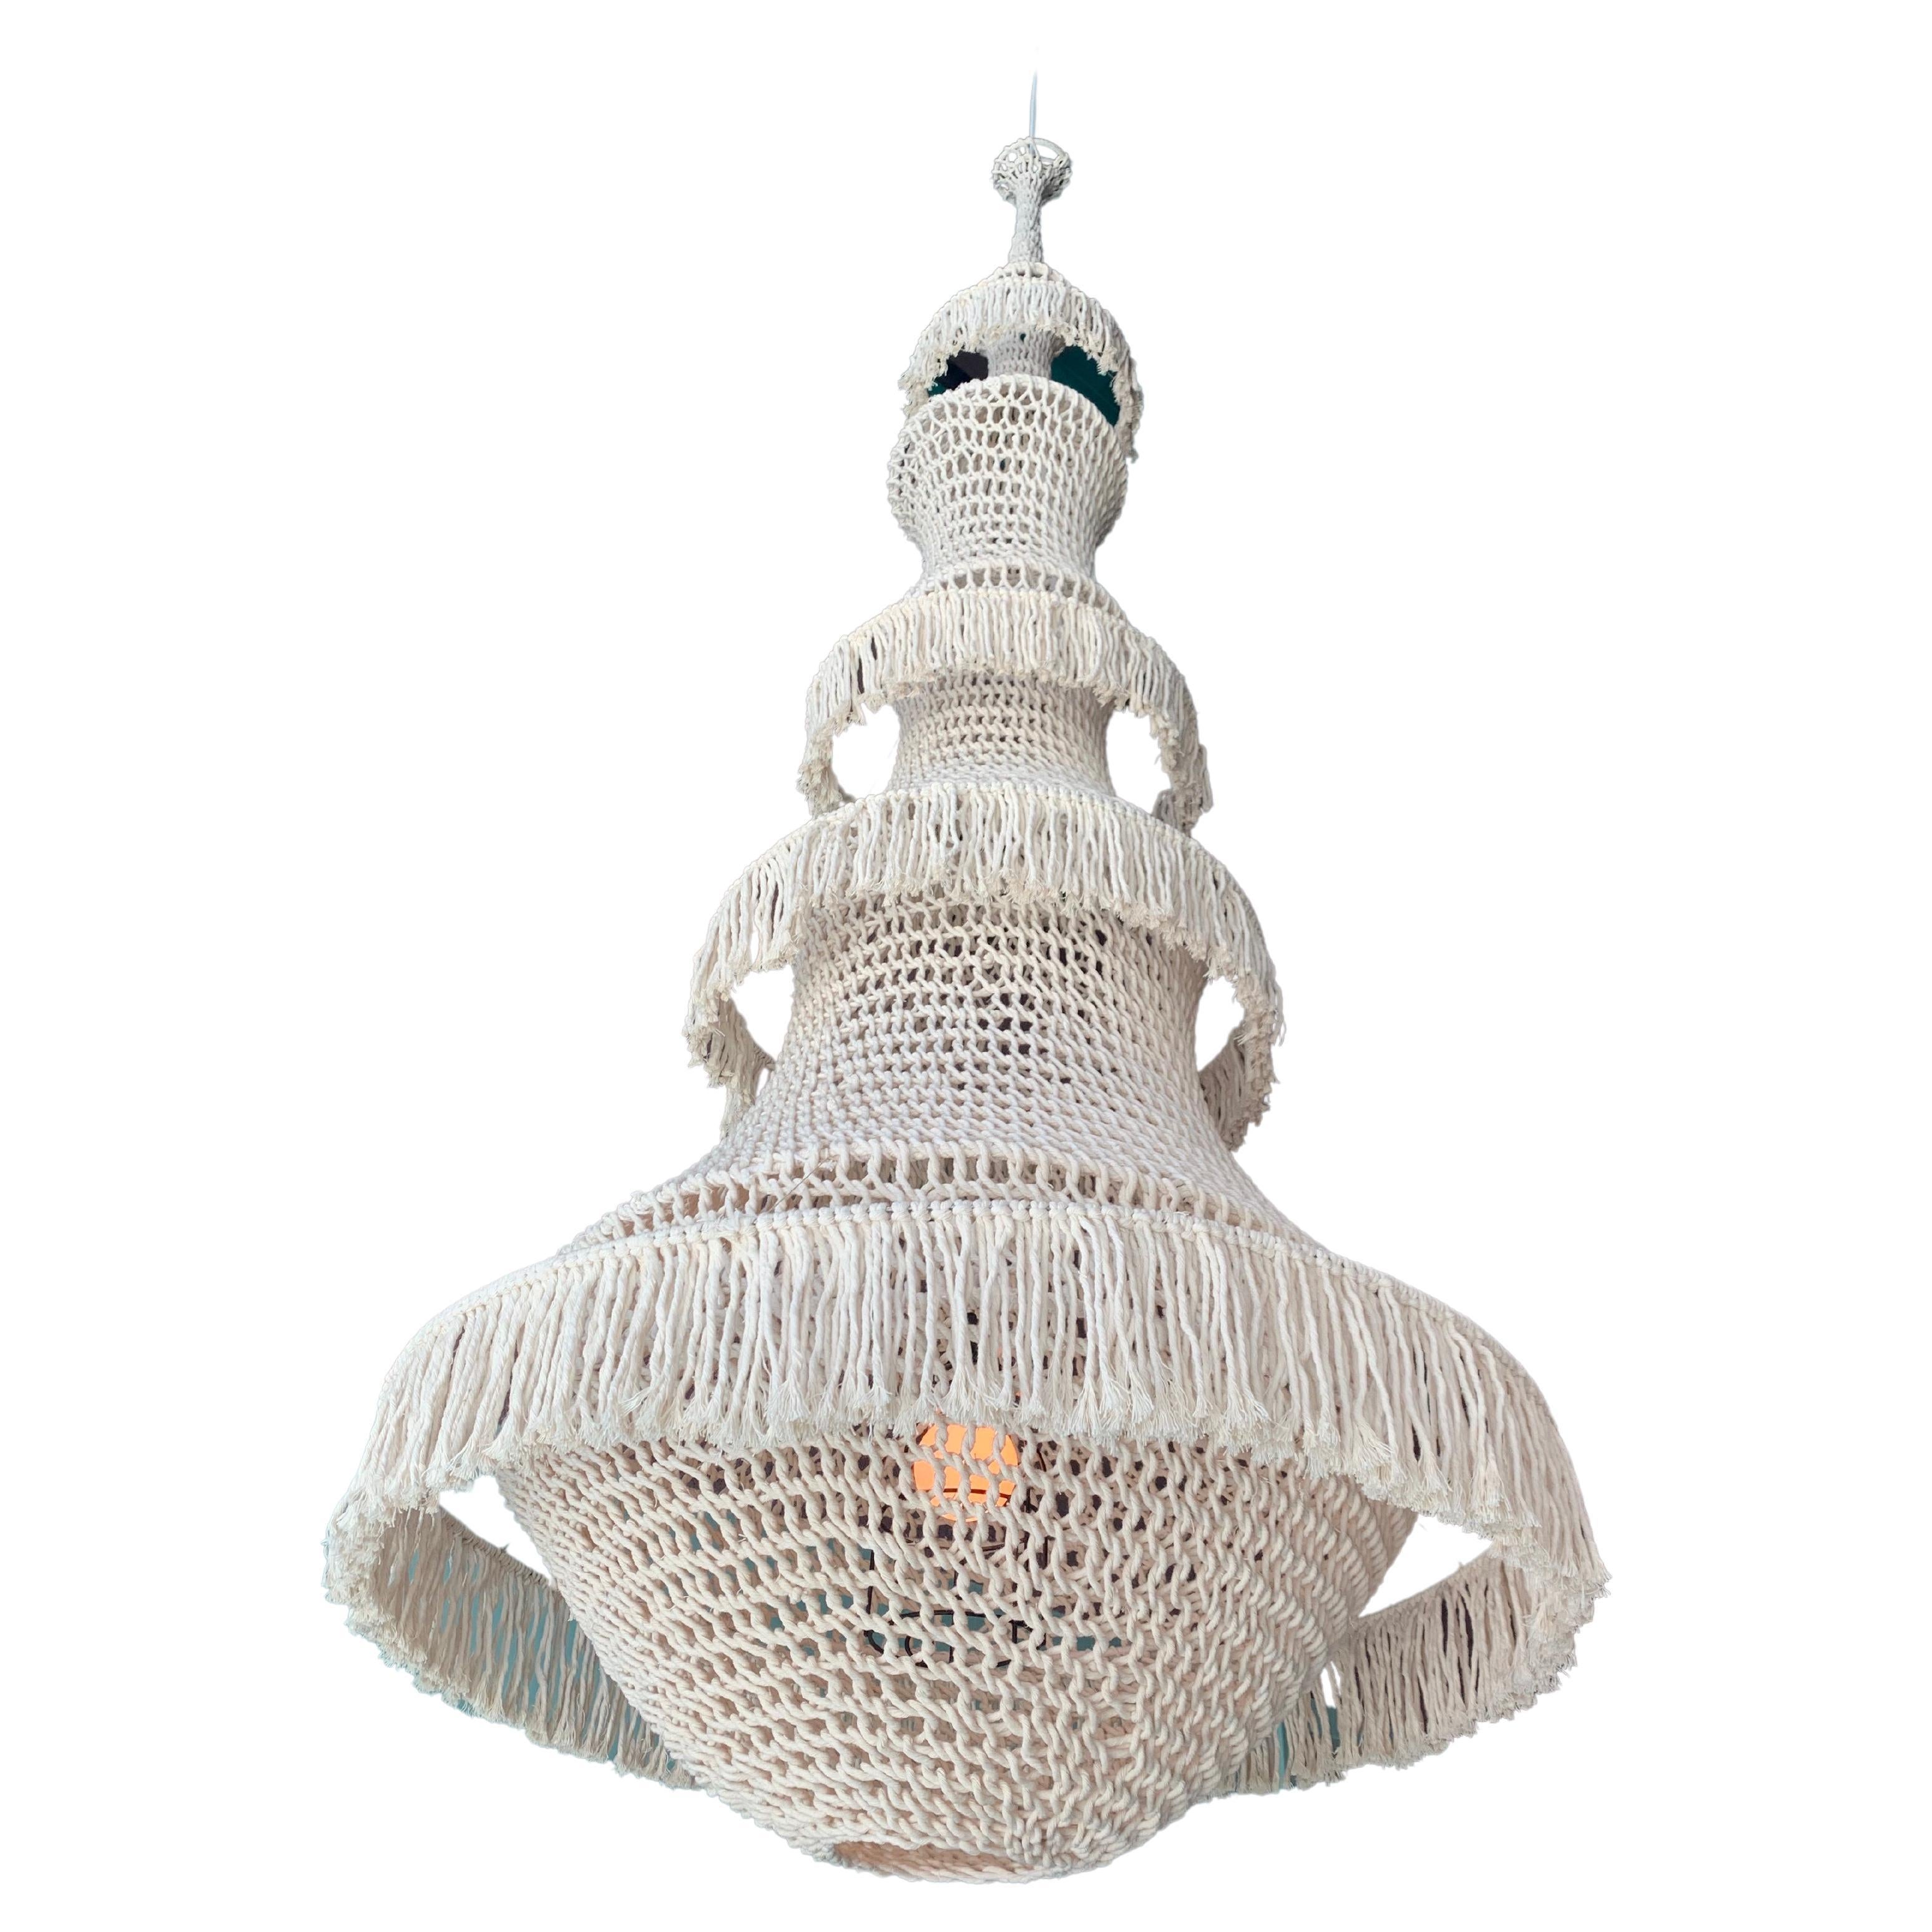 Sculptural Giant Hand-Crochet Textile Chandelier Luzule Raw Collection For Sale